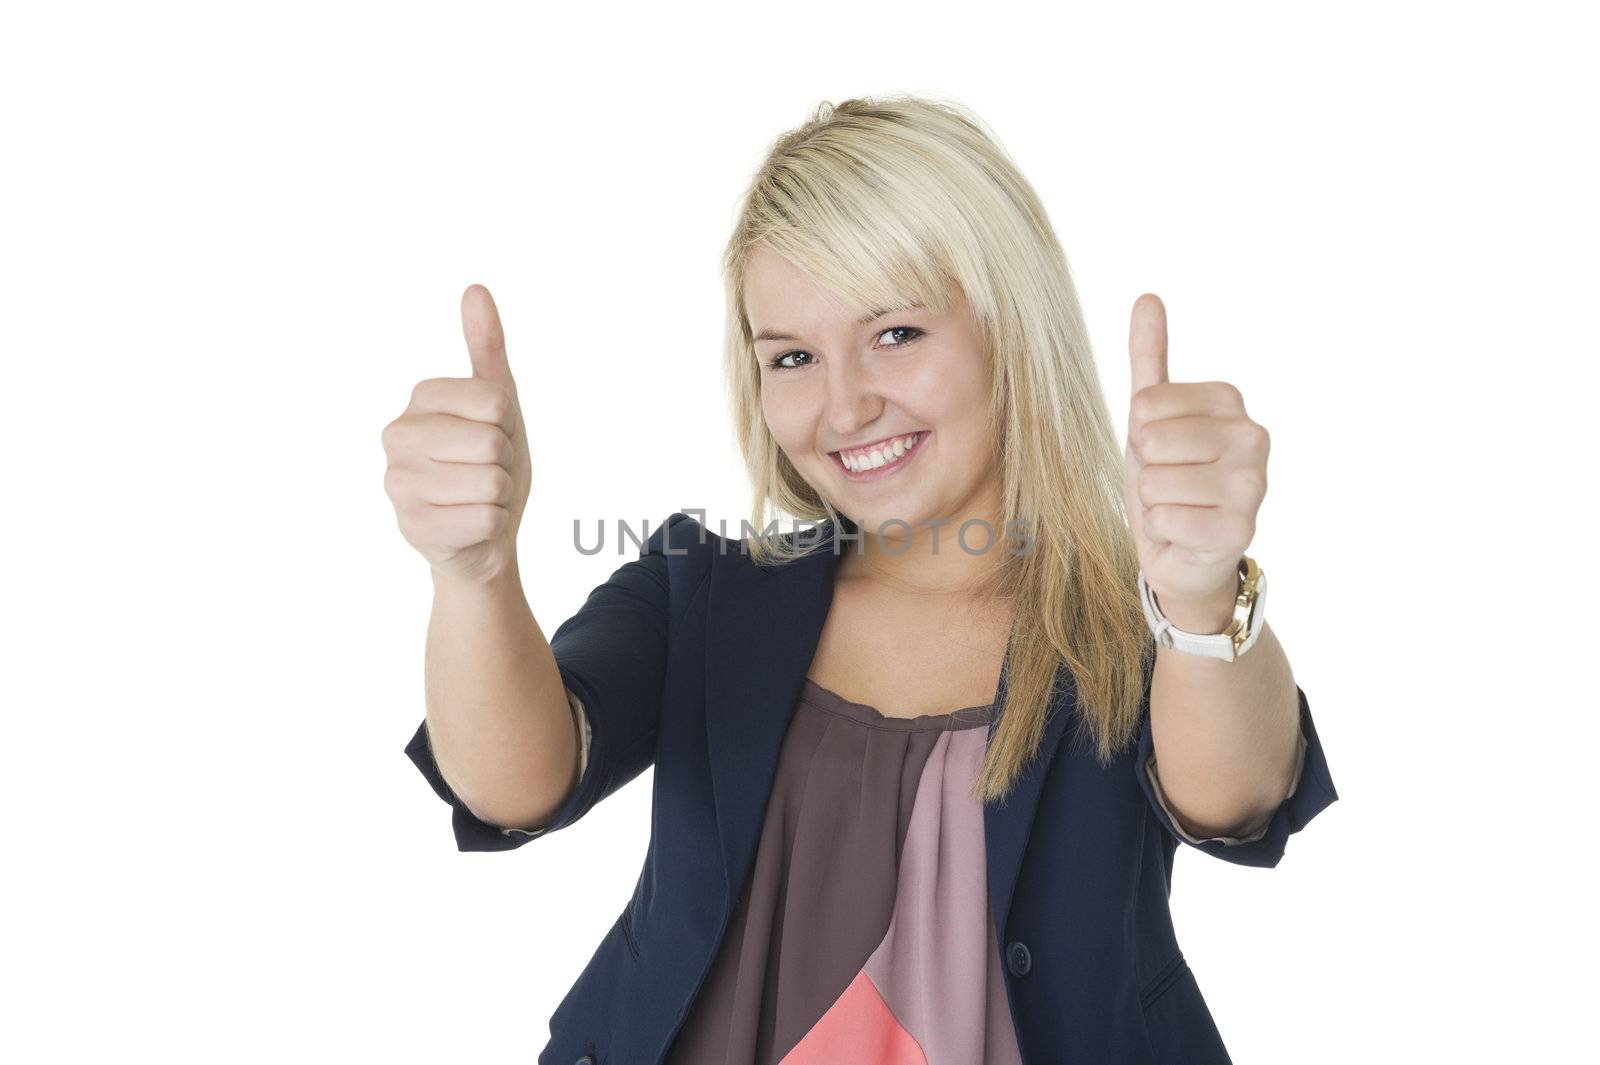 Motivated enthusiastic young woman giving double thumbs up of victory and success while smiling gleefully in celebration